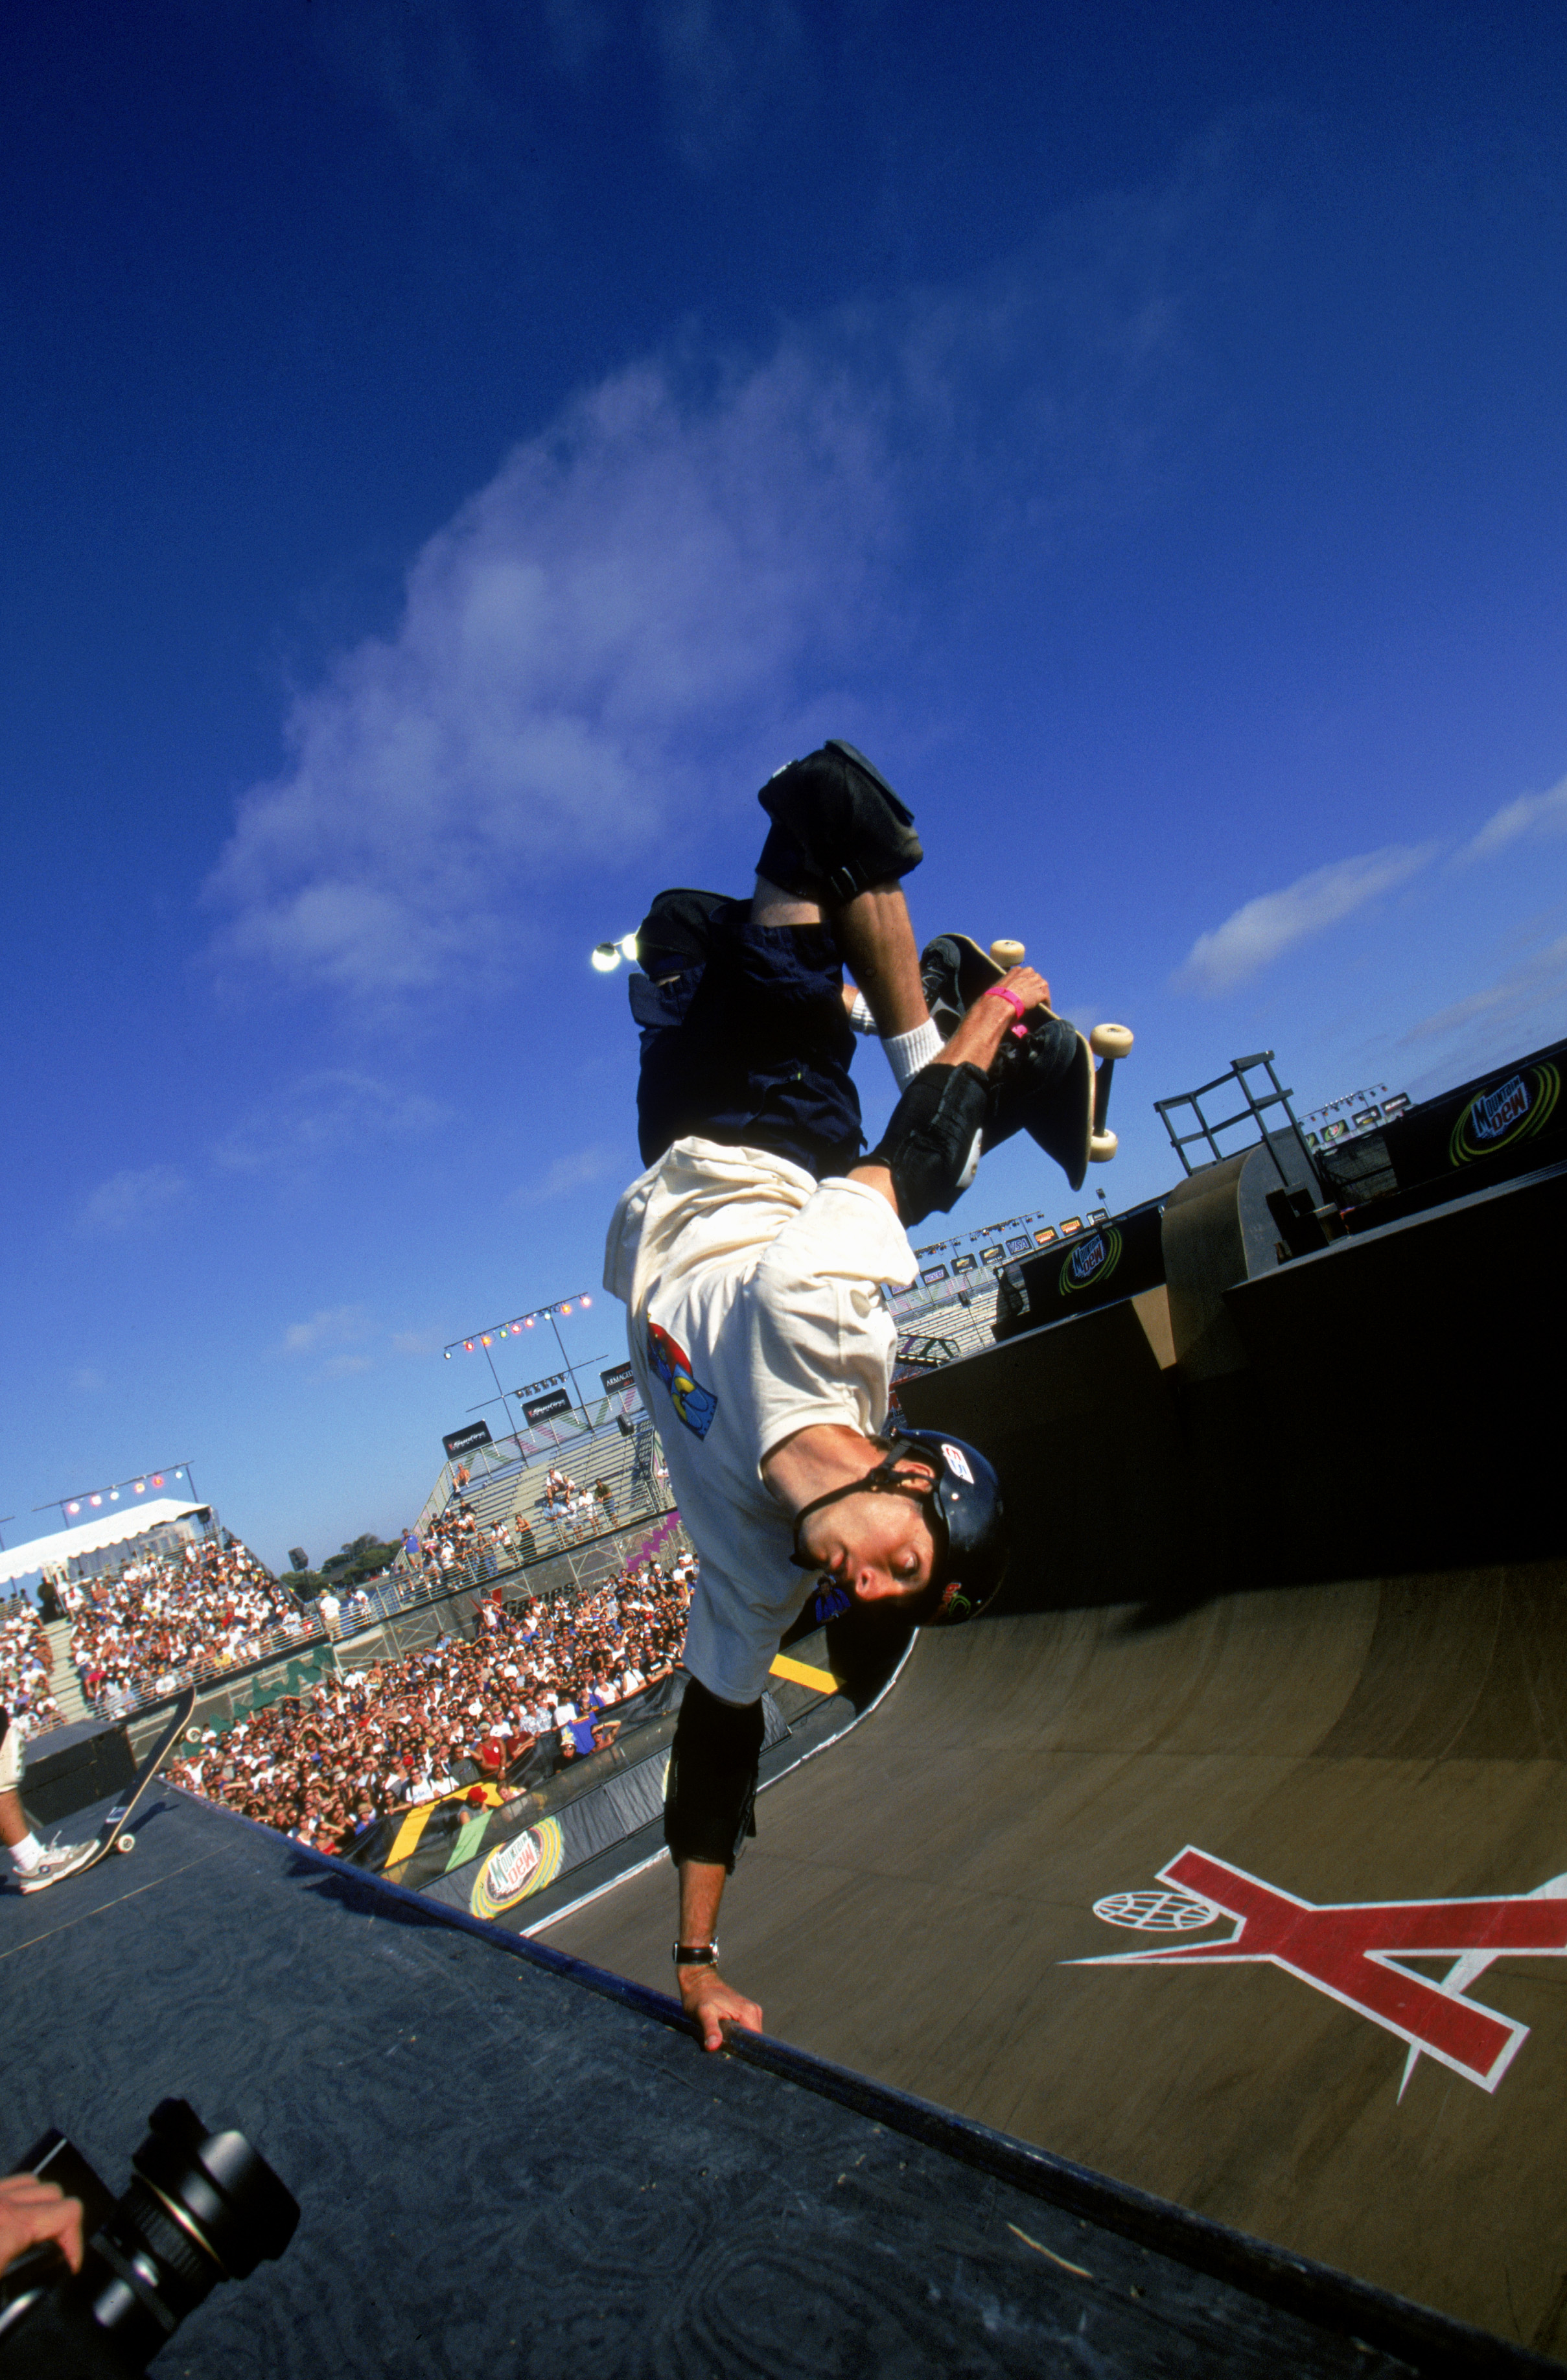 Tony Hawk performs an upside-down skateboarding trick on a ramp at a skateboarding event, with spectators in the background